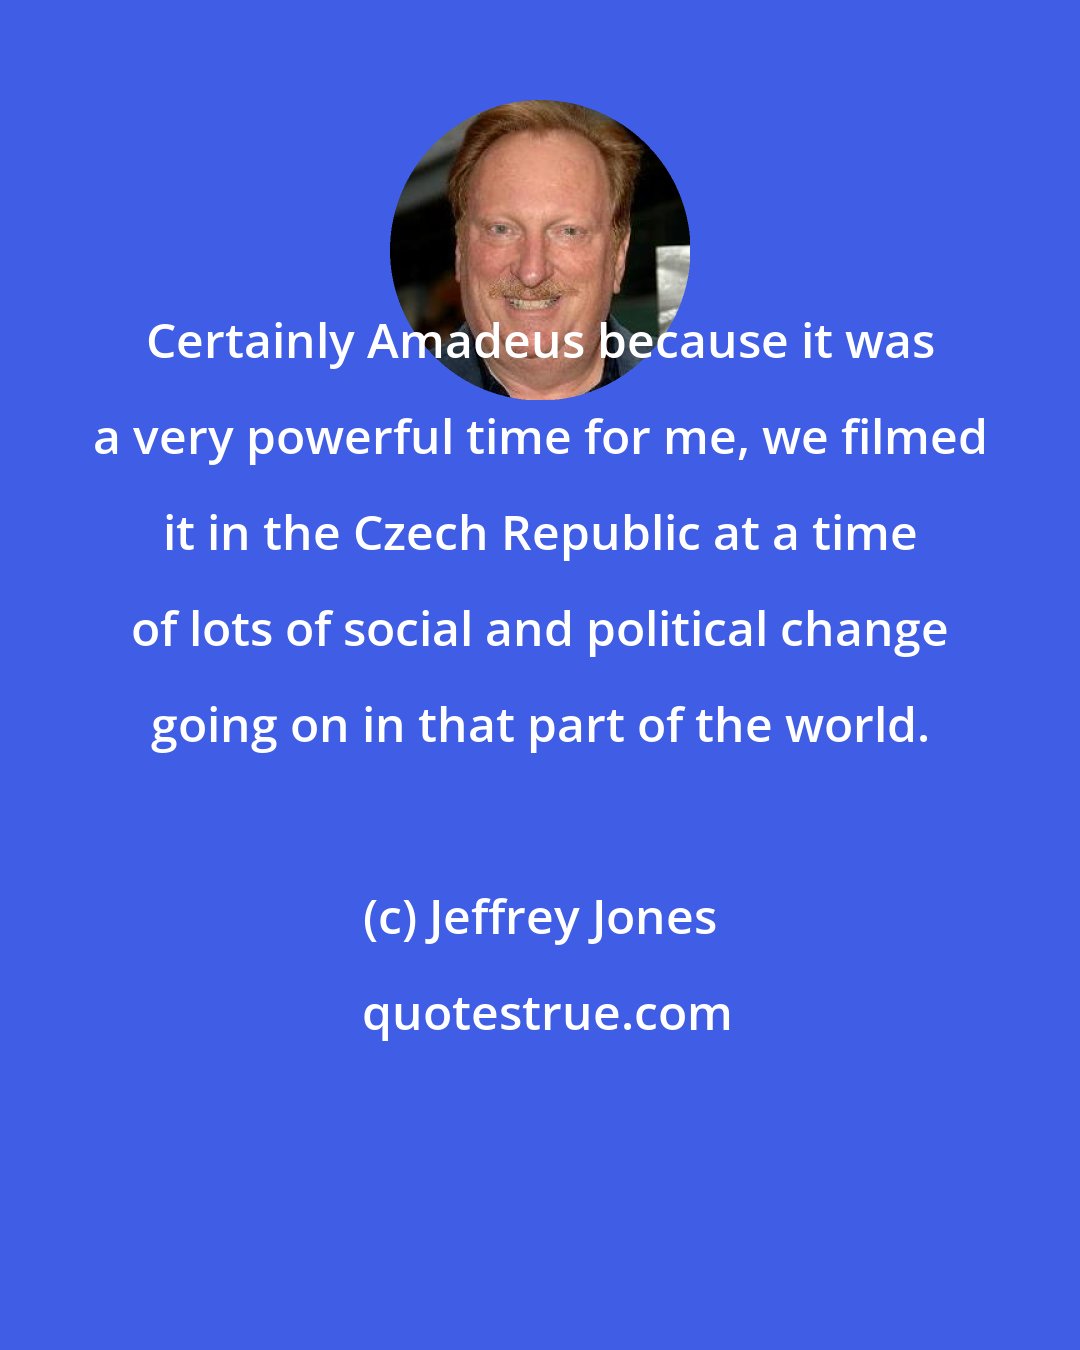 Jeffrey Jones: Certainly Amadeus because it was a very powerful time for me, we filmed it in the Czech Republic at a time of lots of social and political change going on in that part of the world.